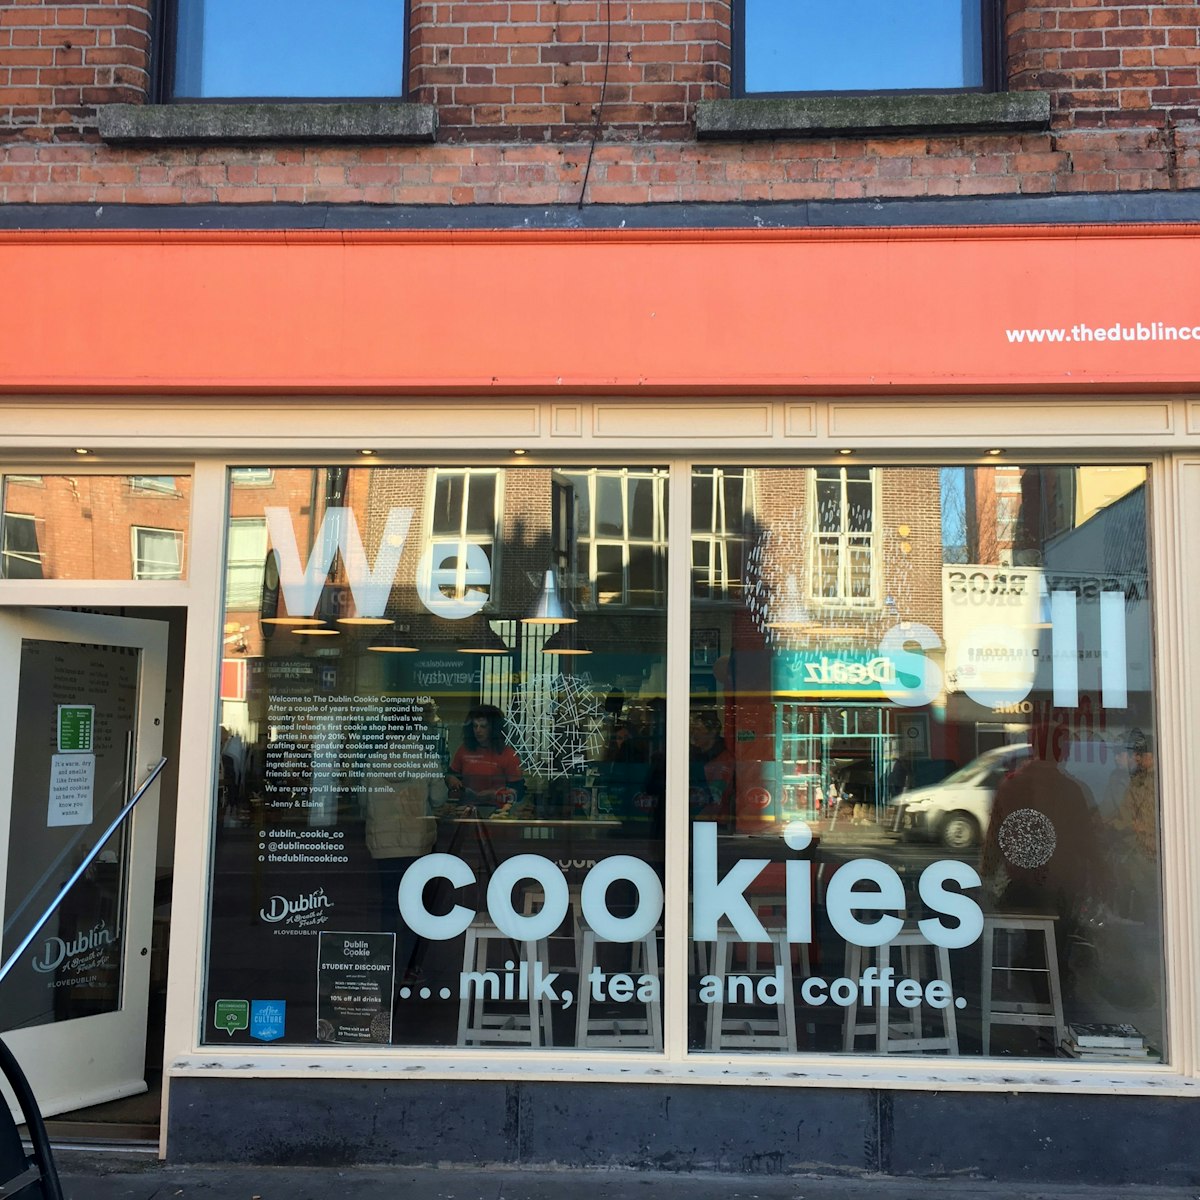 The exterior for Dublin Cookie Company